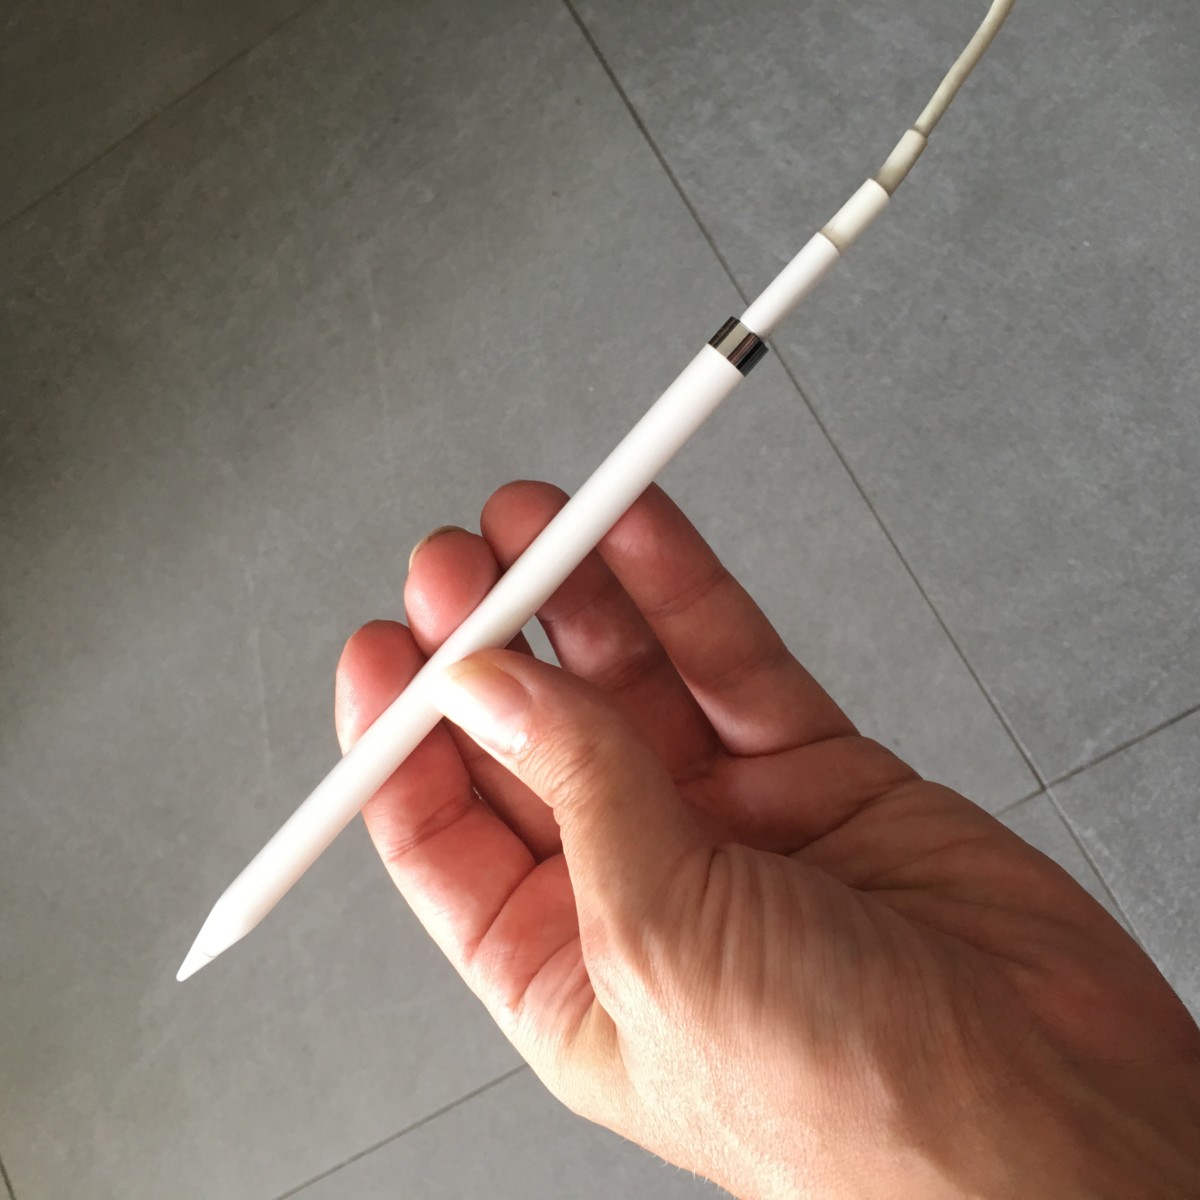 Apple Pencil Review: My Experiences with the 1st Generation – The WP Guru